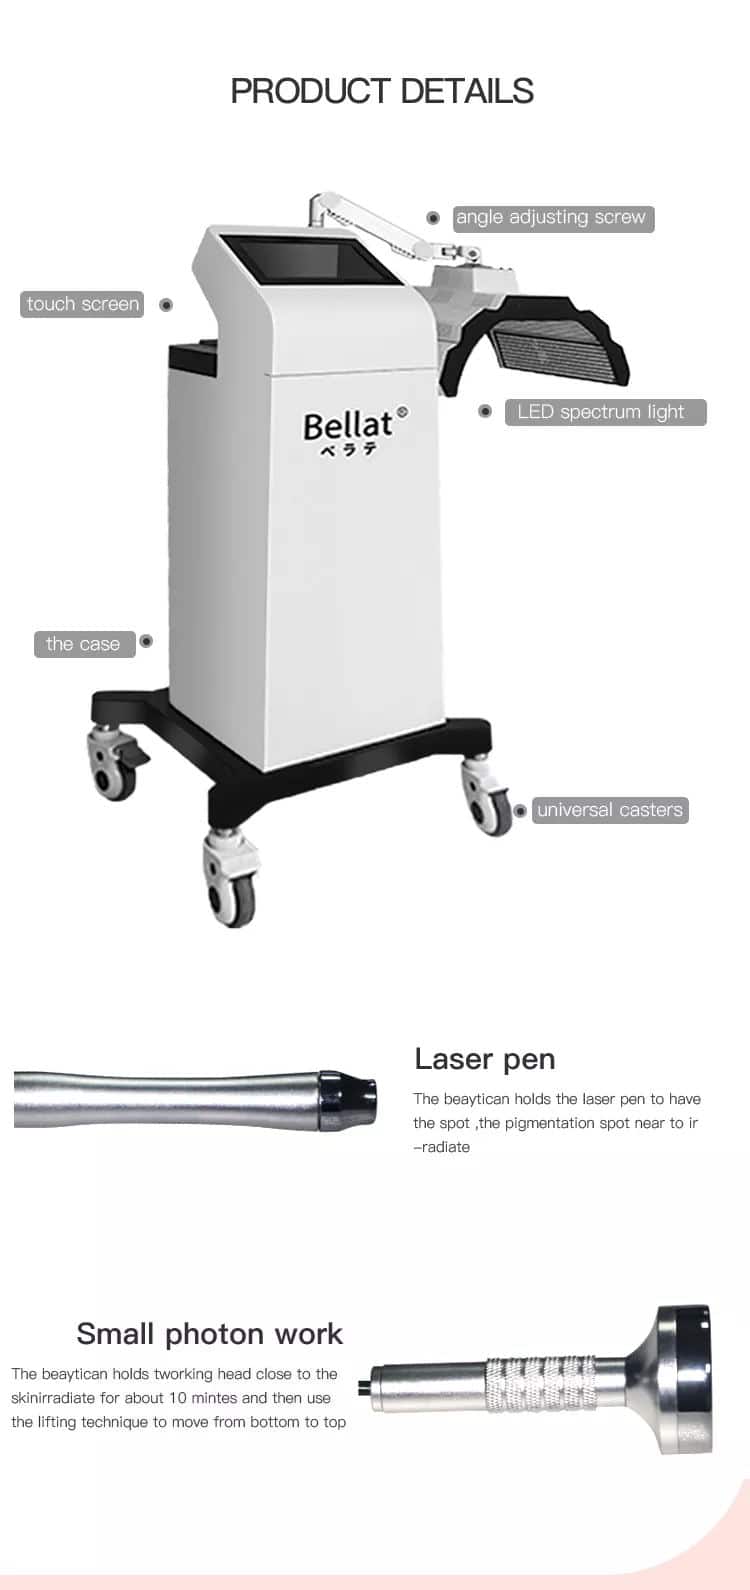 The Professional Photodynamic Therapy PDT Machine for Acne Skin Rejuvenation product details.